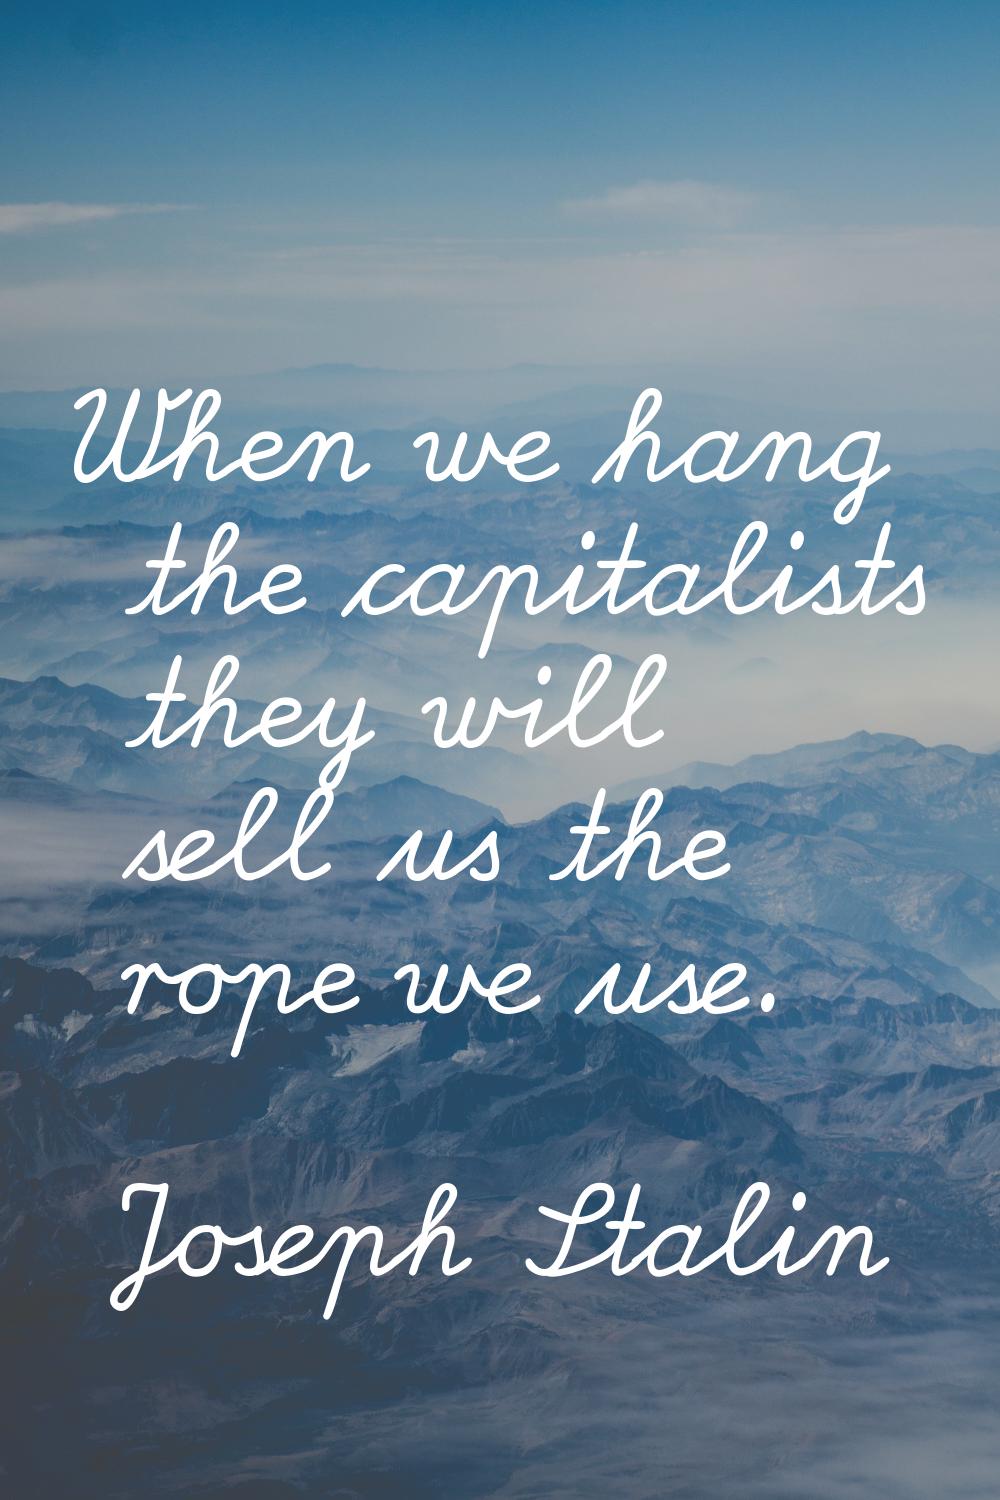 When we hang the capitalists they will sell us the rope we use.